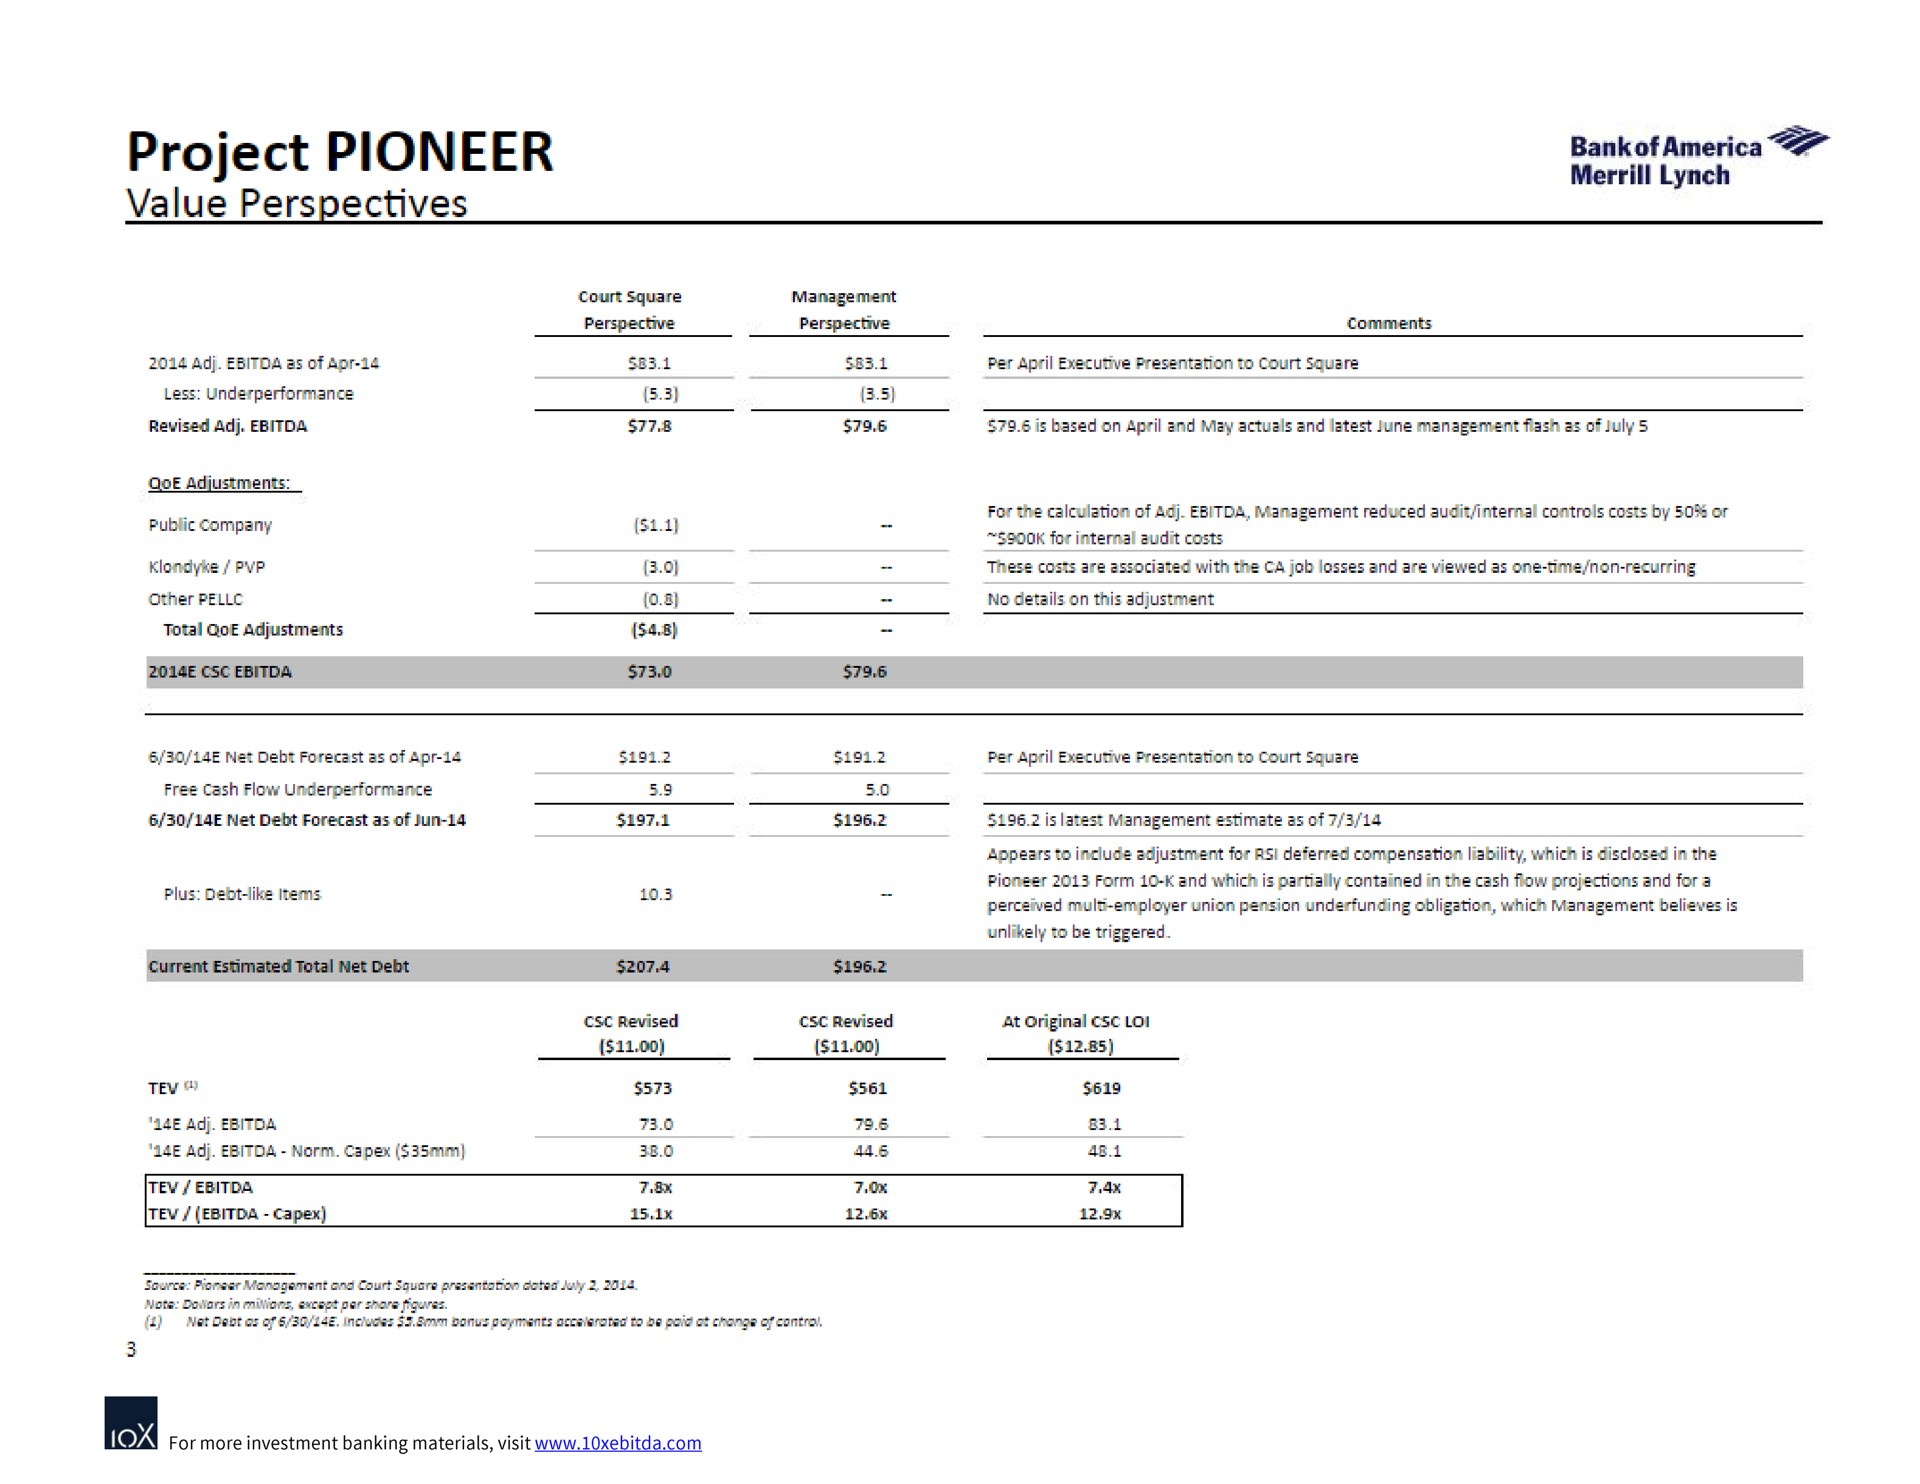 project pioneer value perspectives | Bank of America